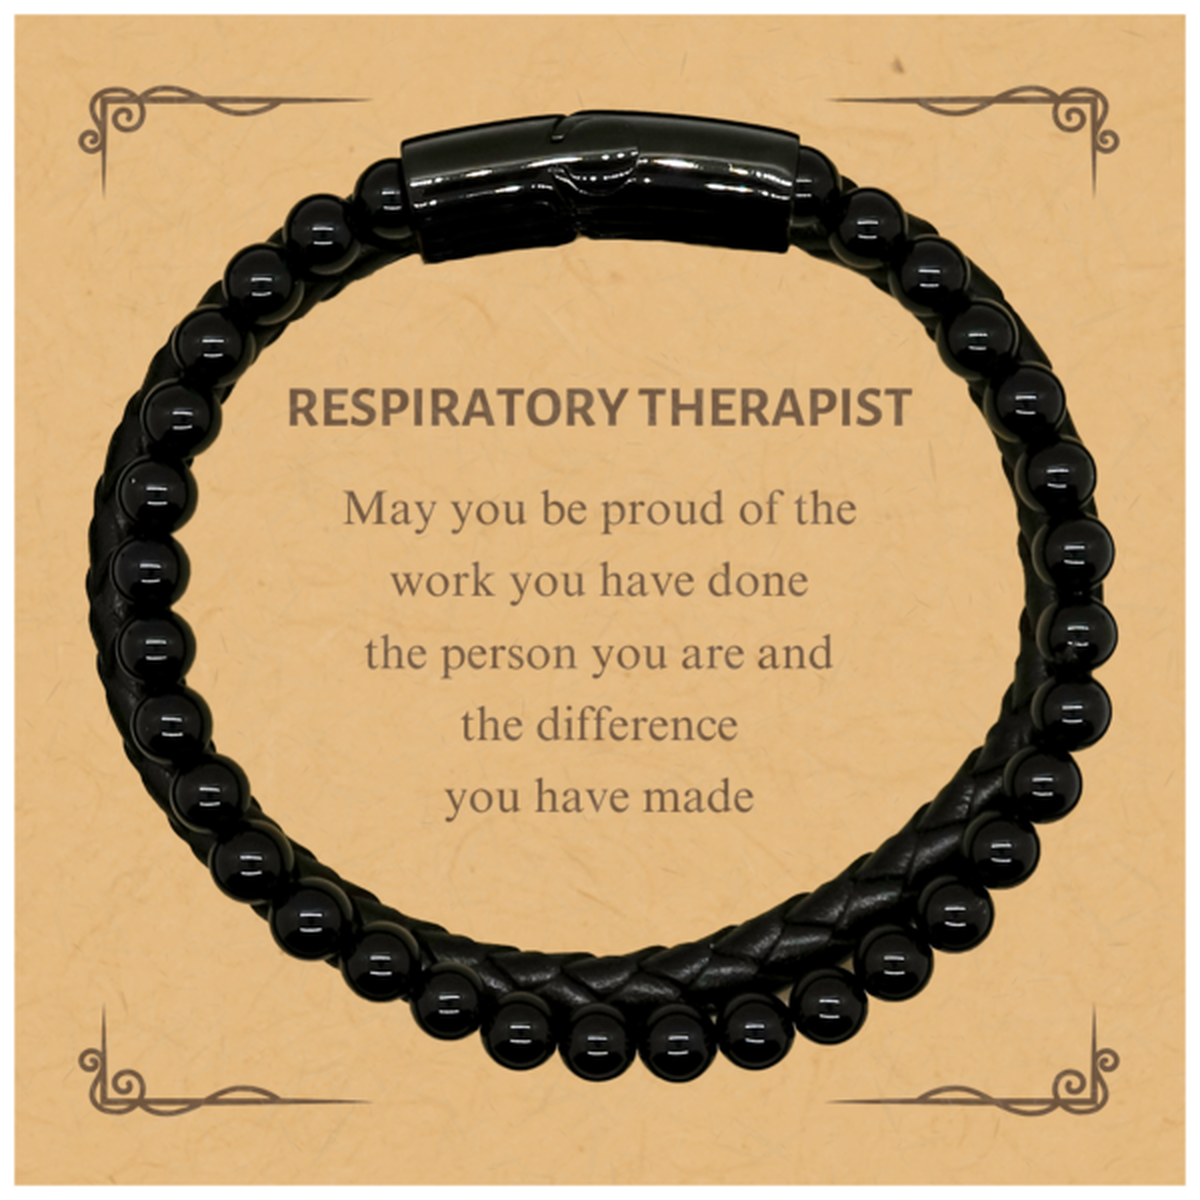 Respiratory Therapist May you be proud of the work you have done, Retirement Respiratory Therapist Stone Leather Bracelets for Colleague Appreciation Gifts Amazing for Respiratory Therapist